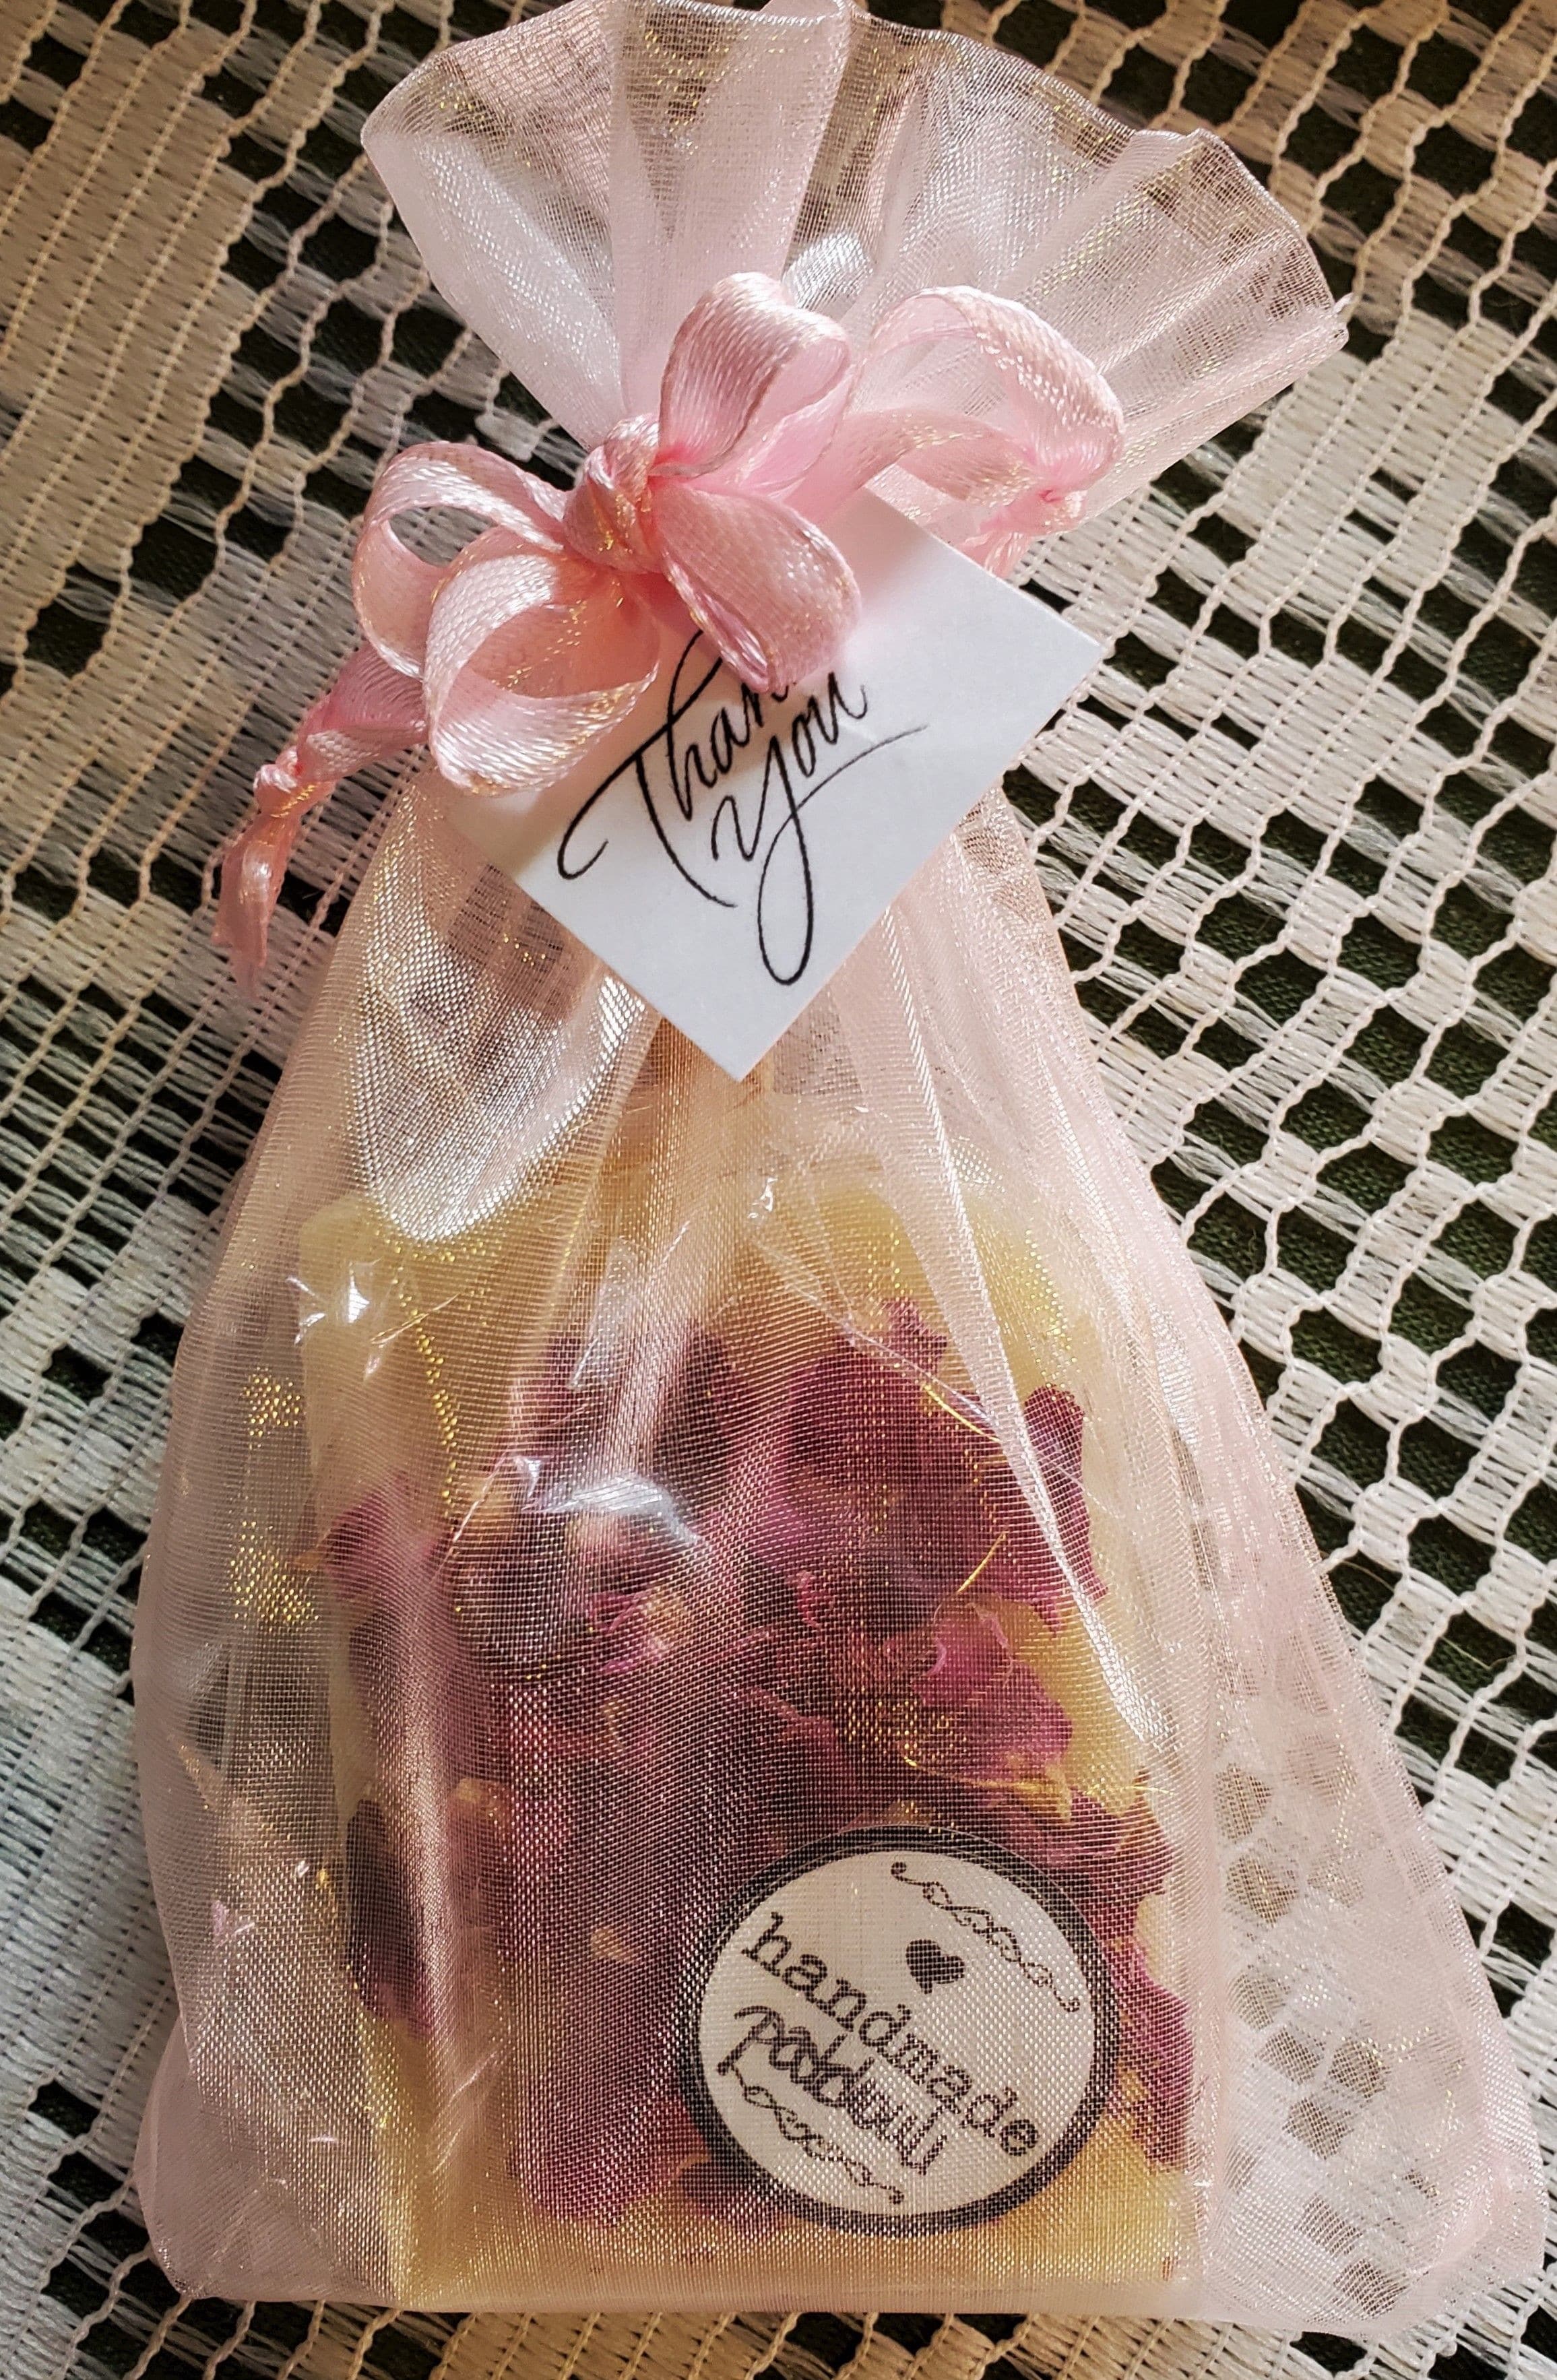 All natural handmade soap gifts decorated with organic botanicals.  This elegant little soap gift is delivered in a cute organza bag; inexpensive and adorable.